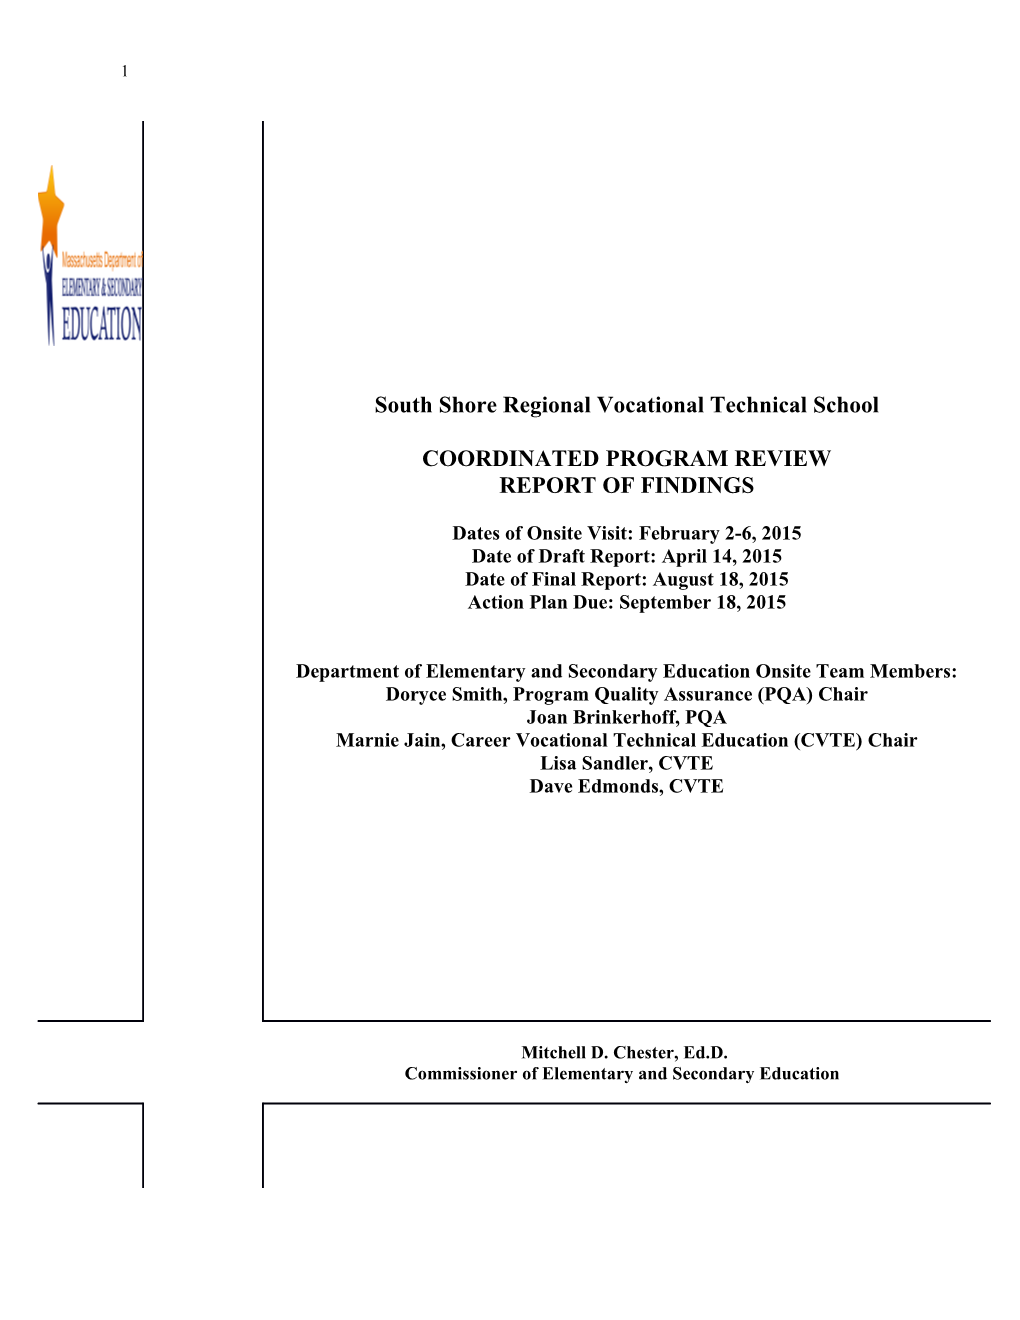 South Shore RVTS CPR Final Report 2015